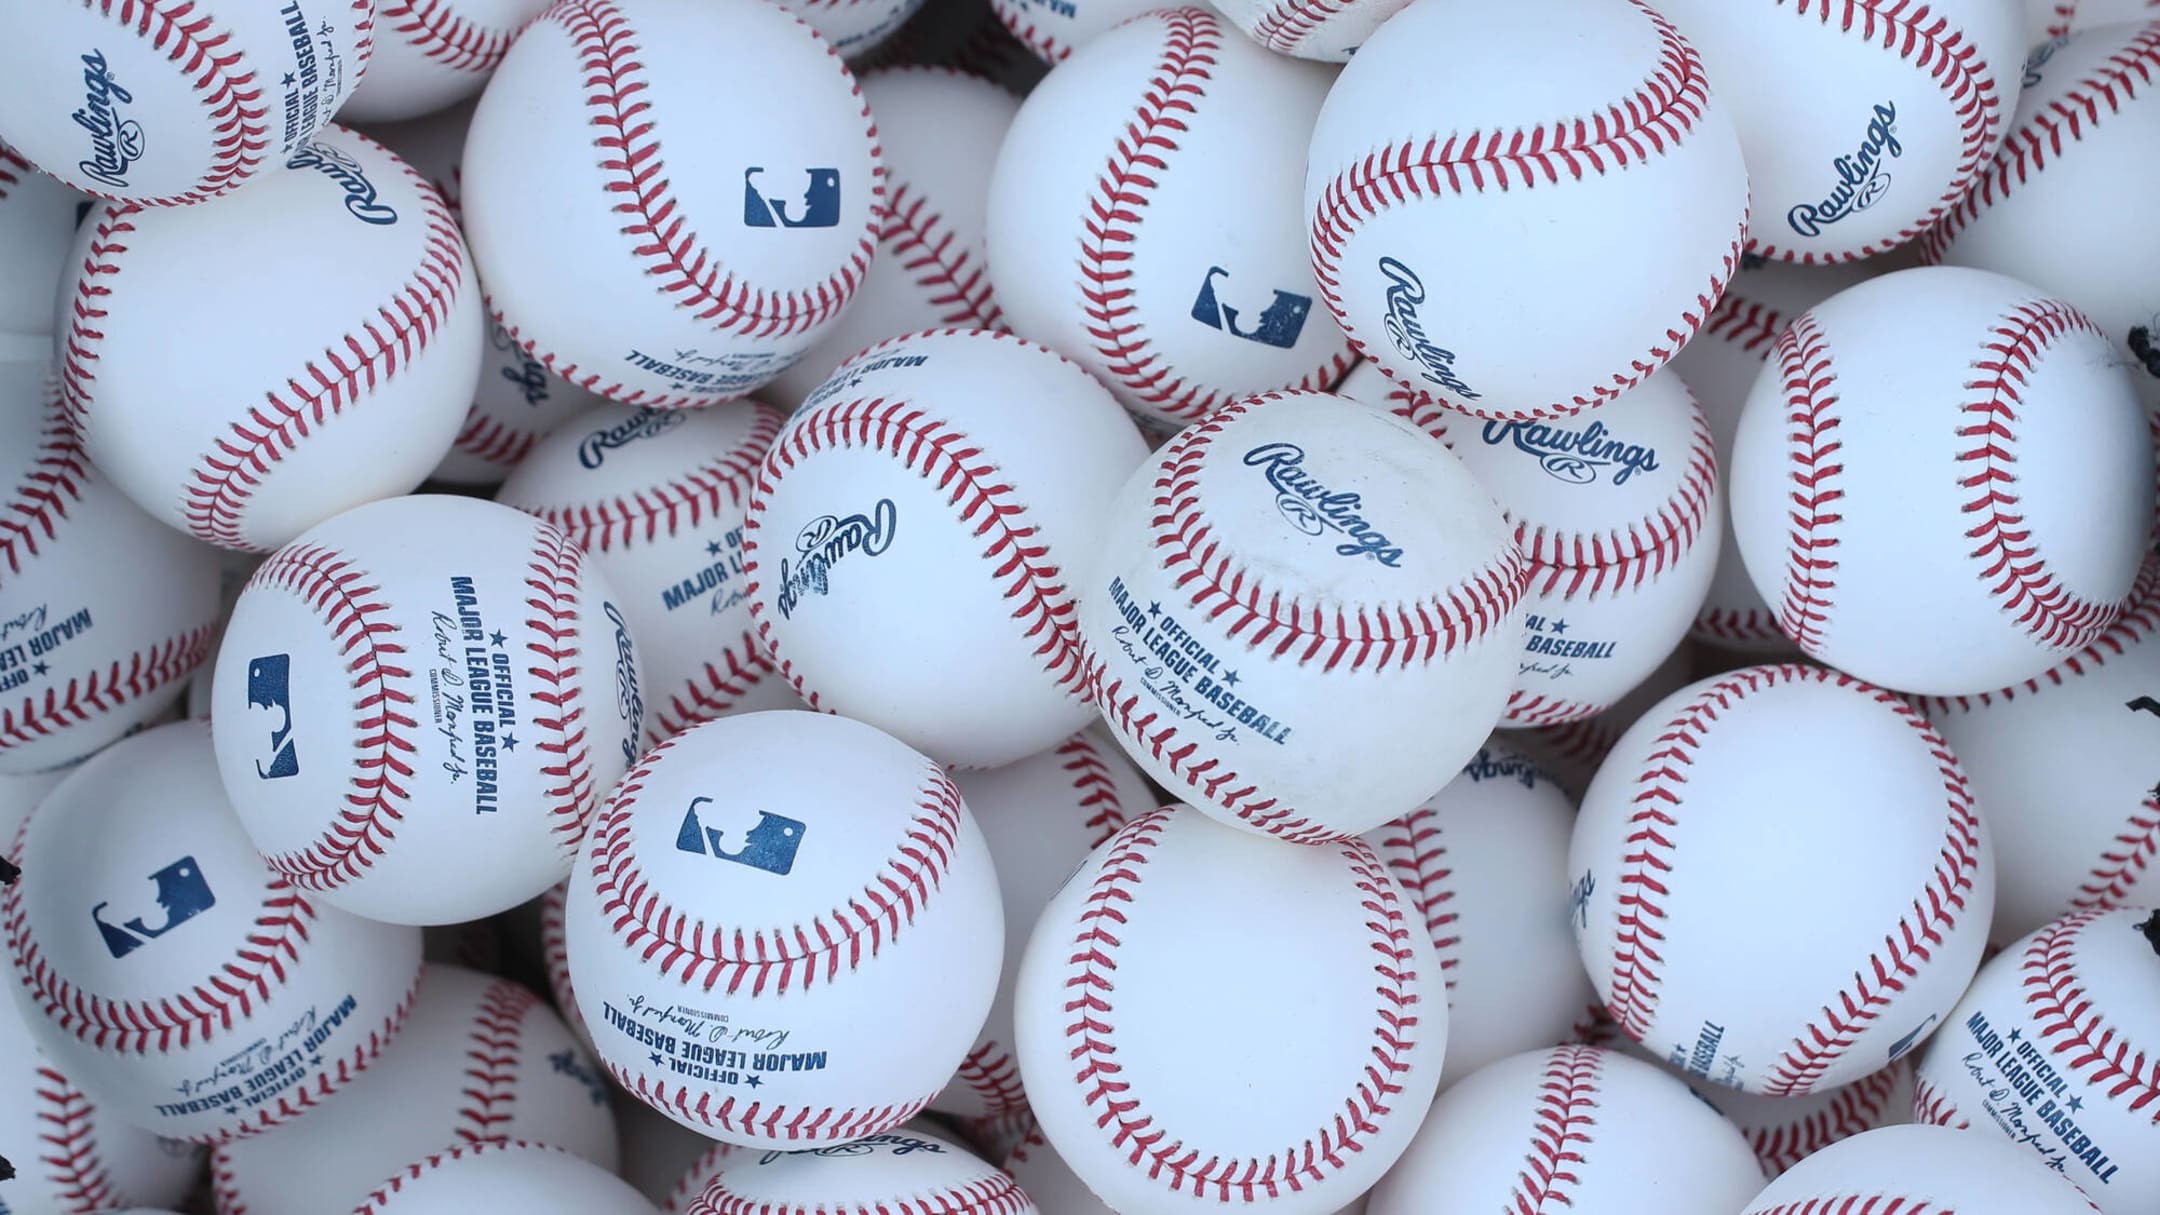 MLB, players finalize collective bargaining deal through '26 - The